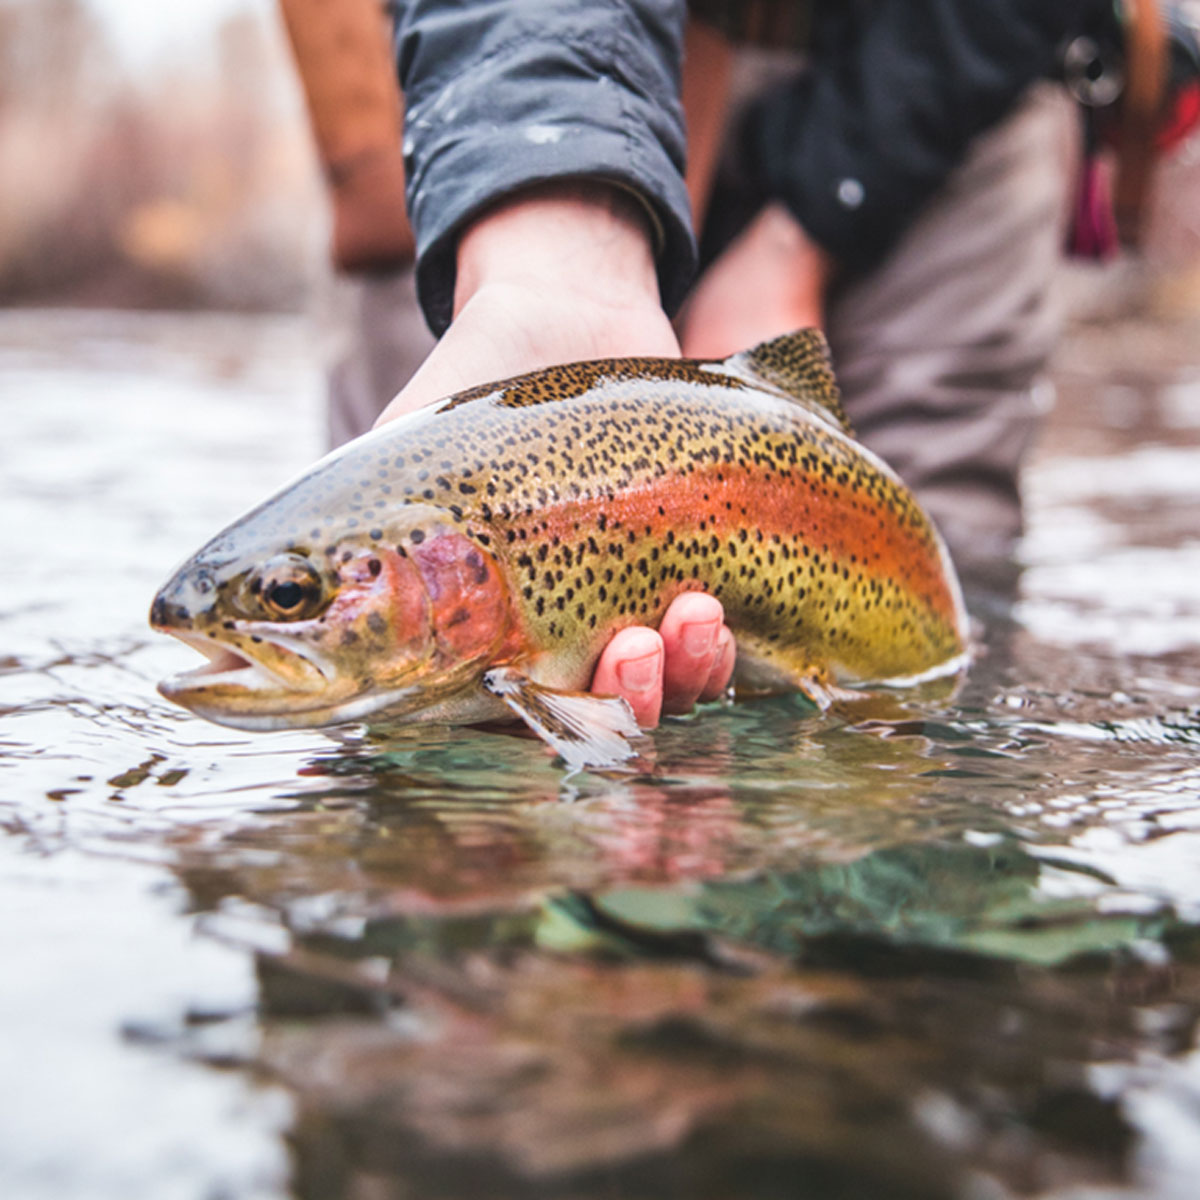 Fly Fishing Sun Valley | Silver Creek Outfitters